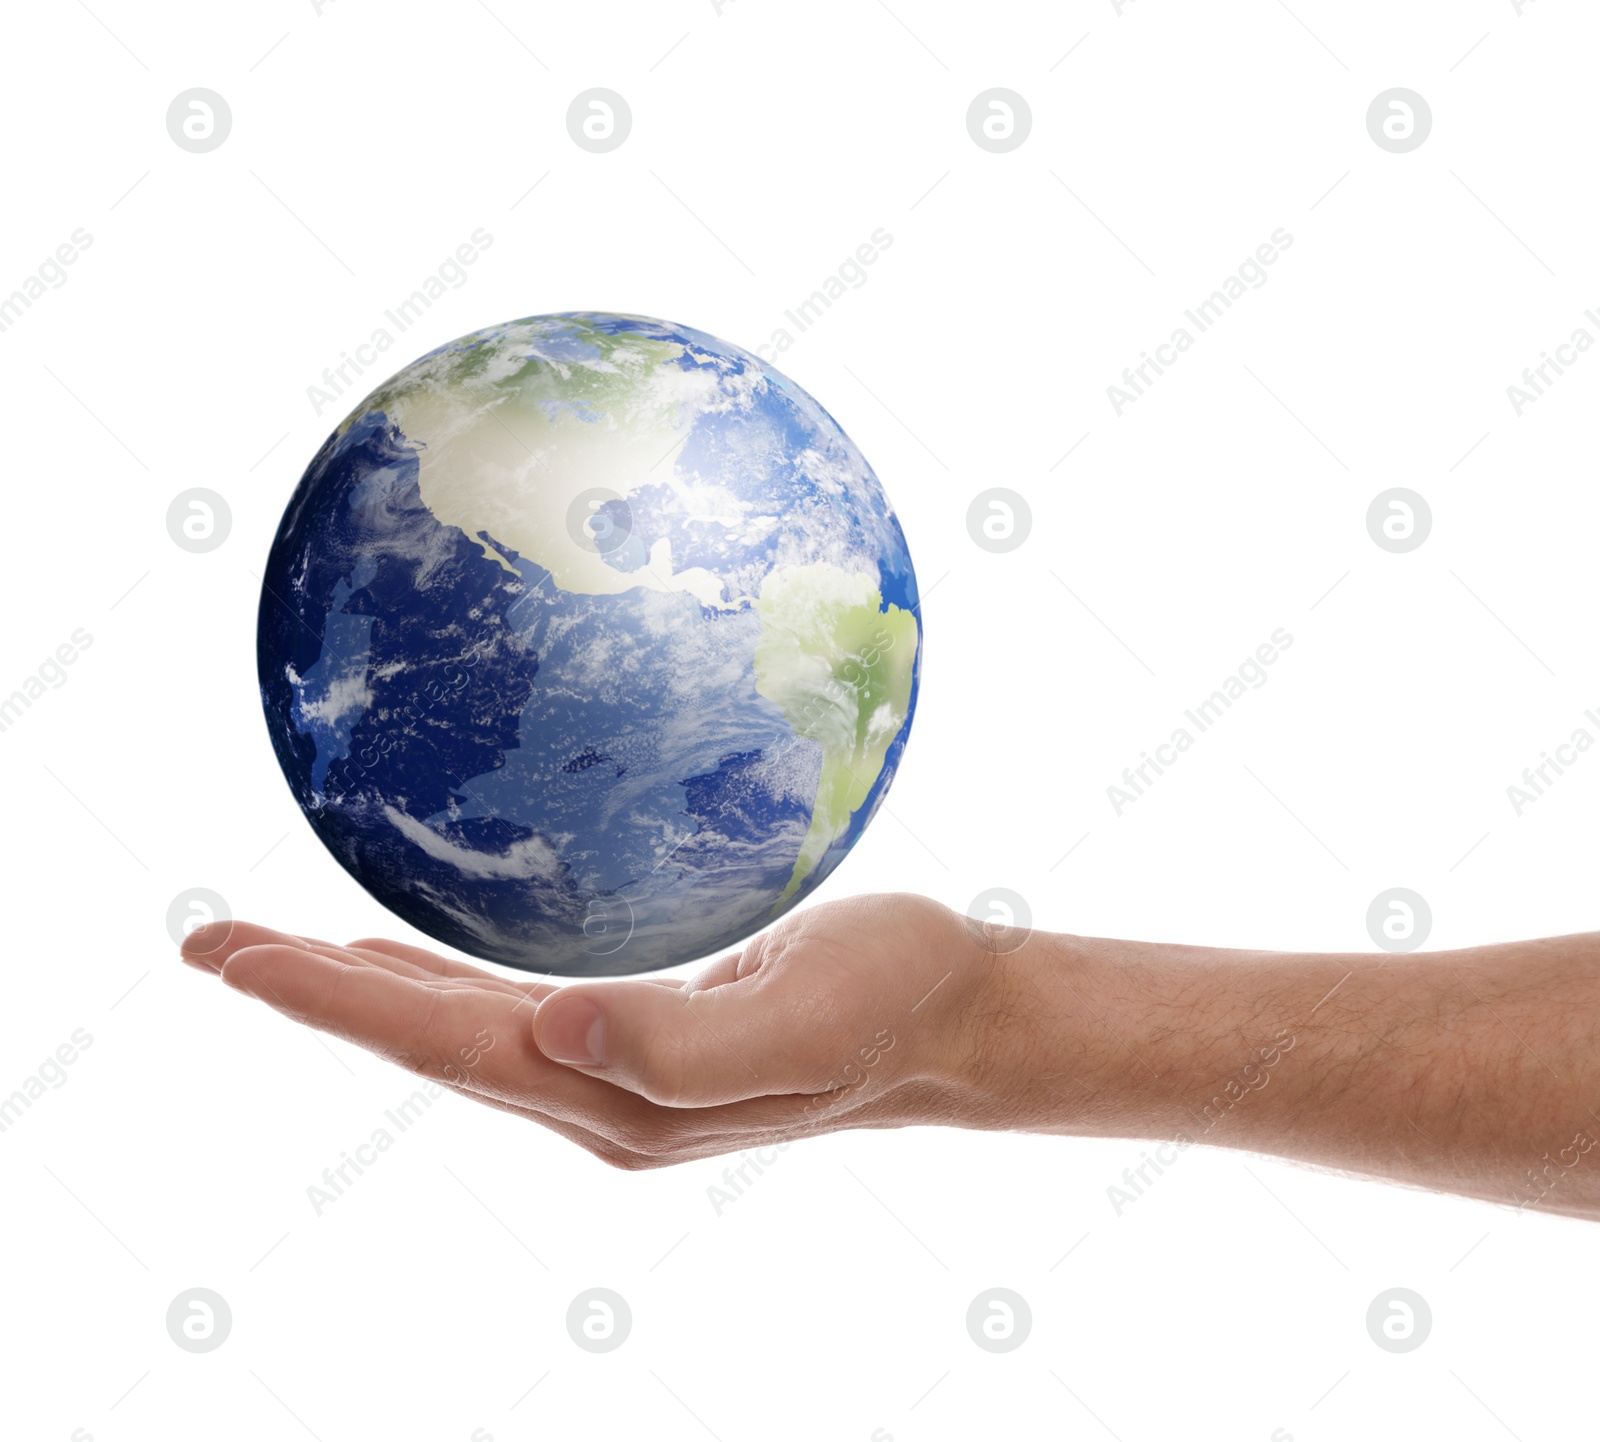 Image of World in our hands. Man holding digital model of Earth on white background, closeup view 